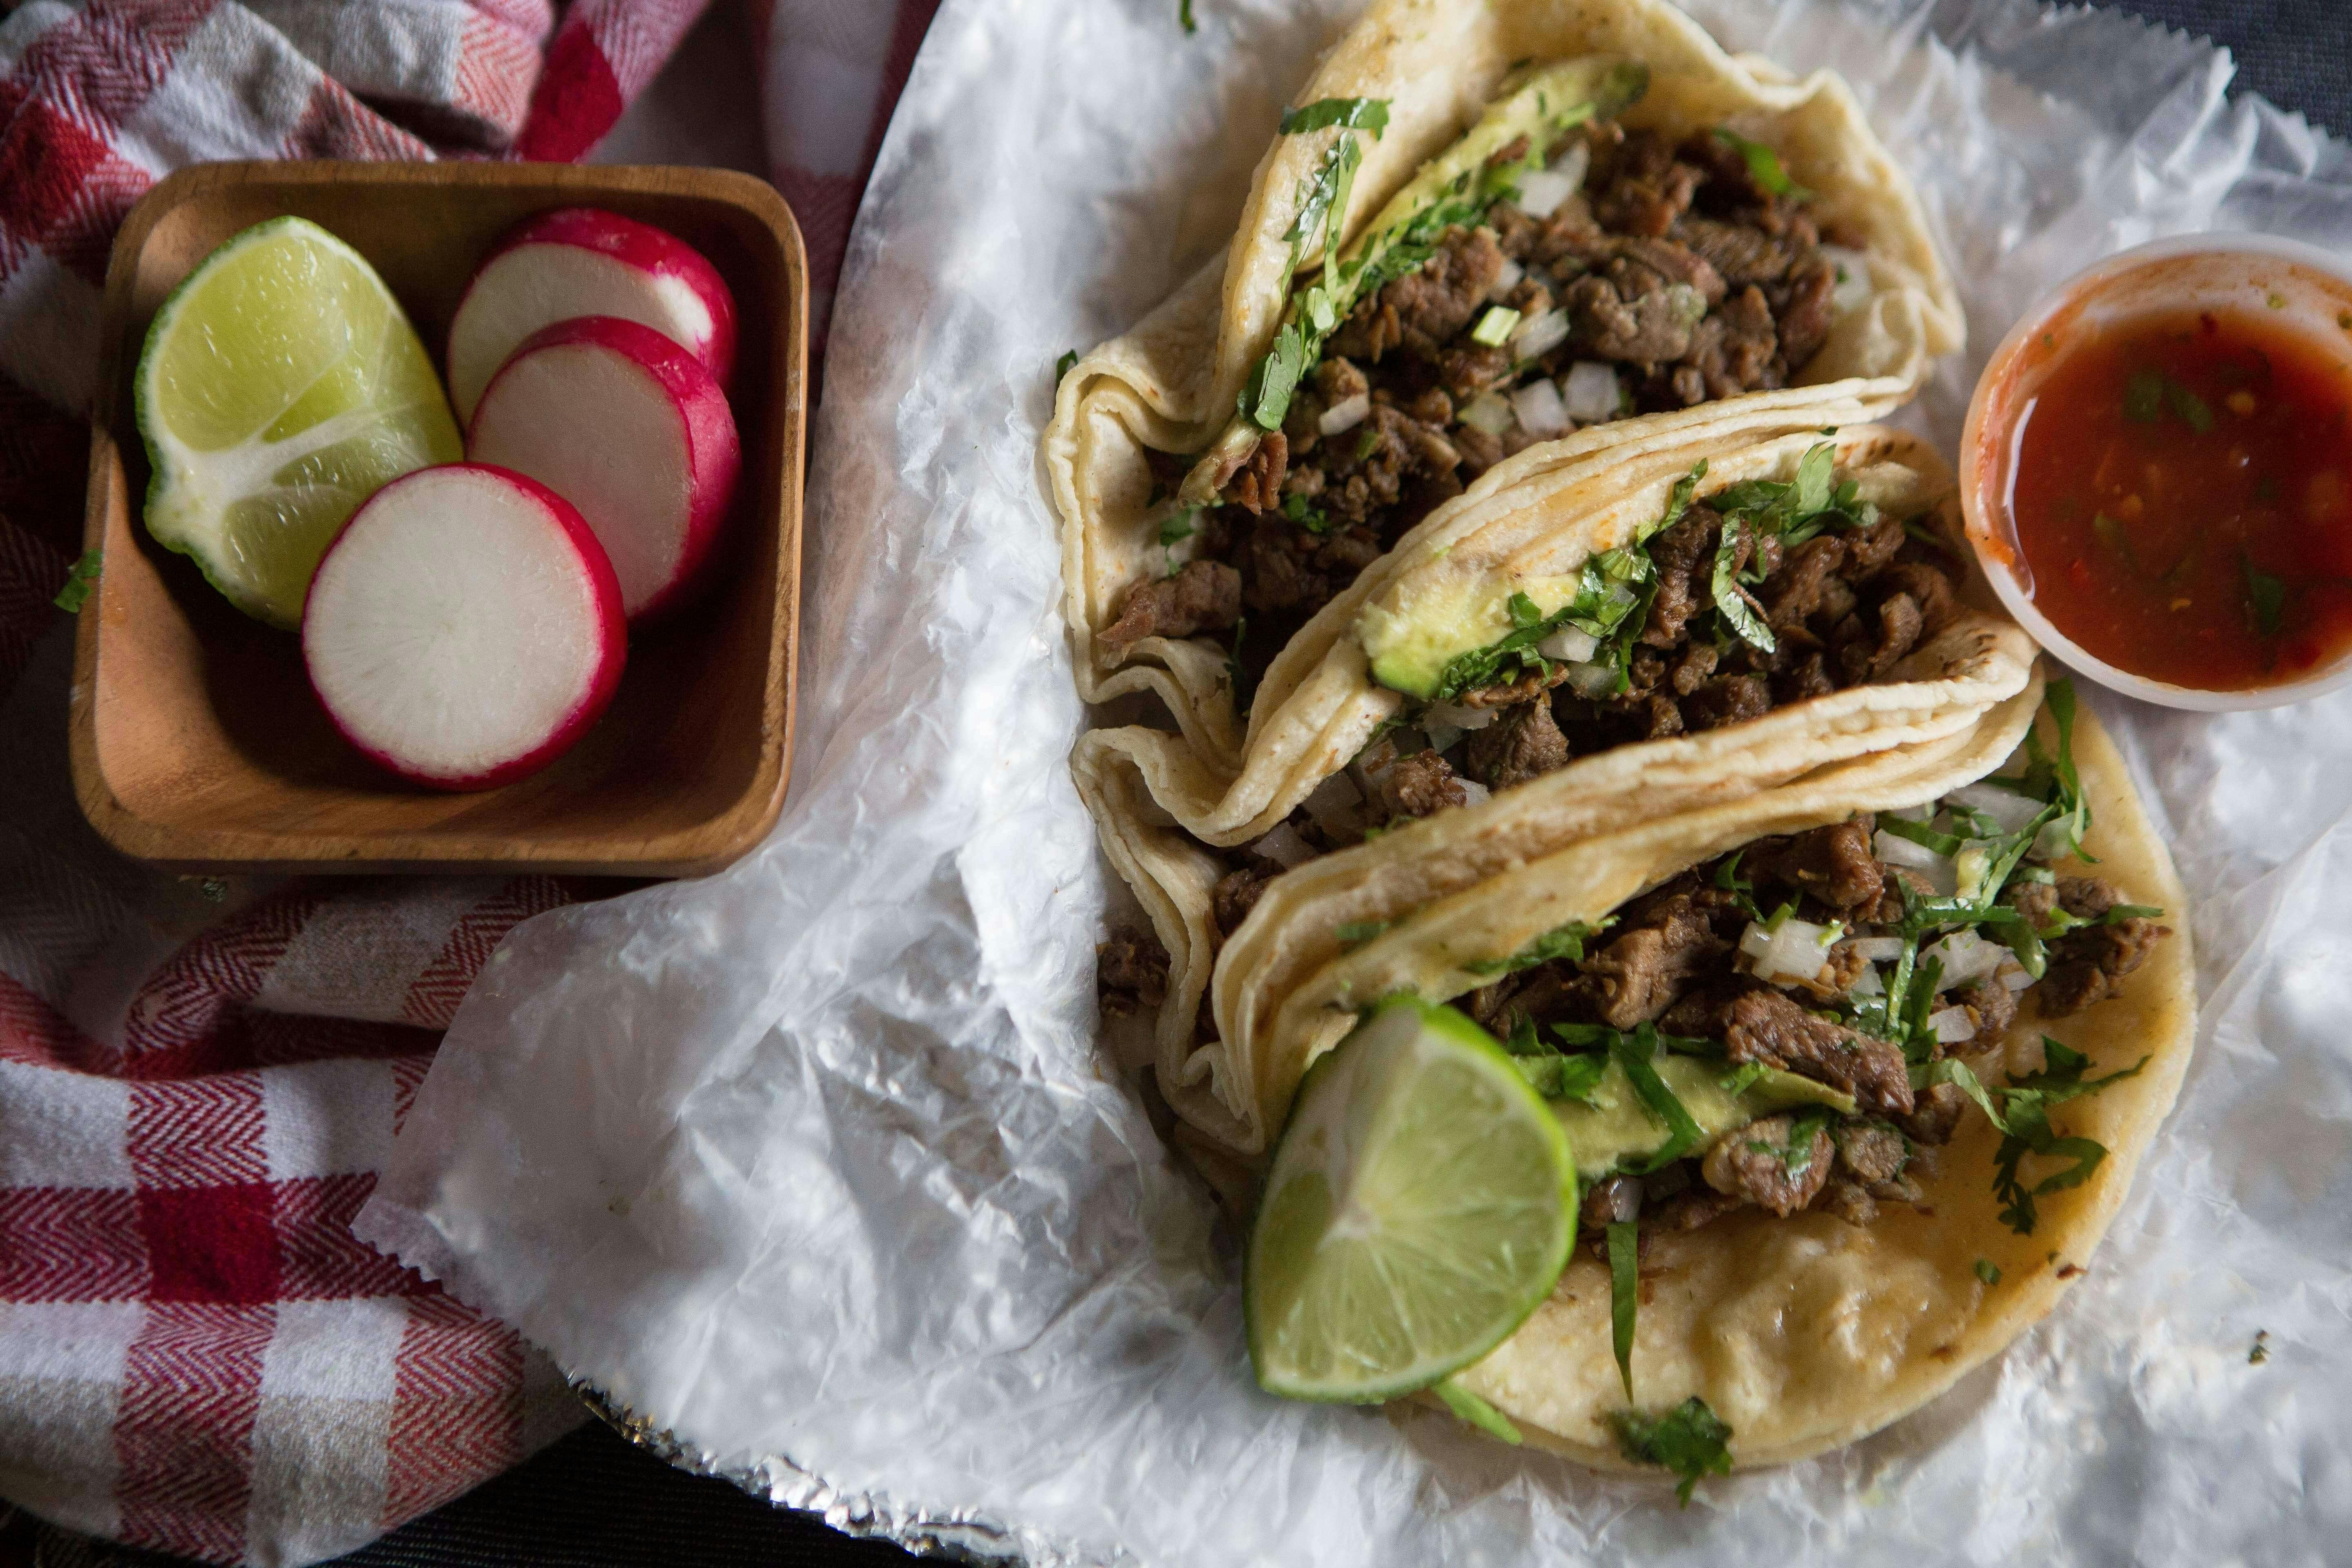 Tacos with lime, dipping sauce and radish